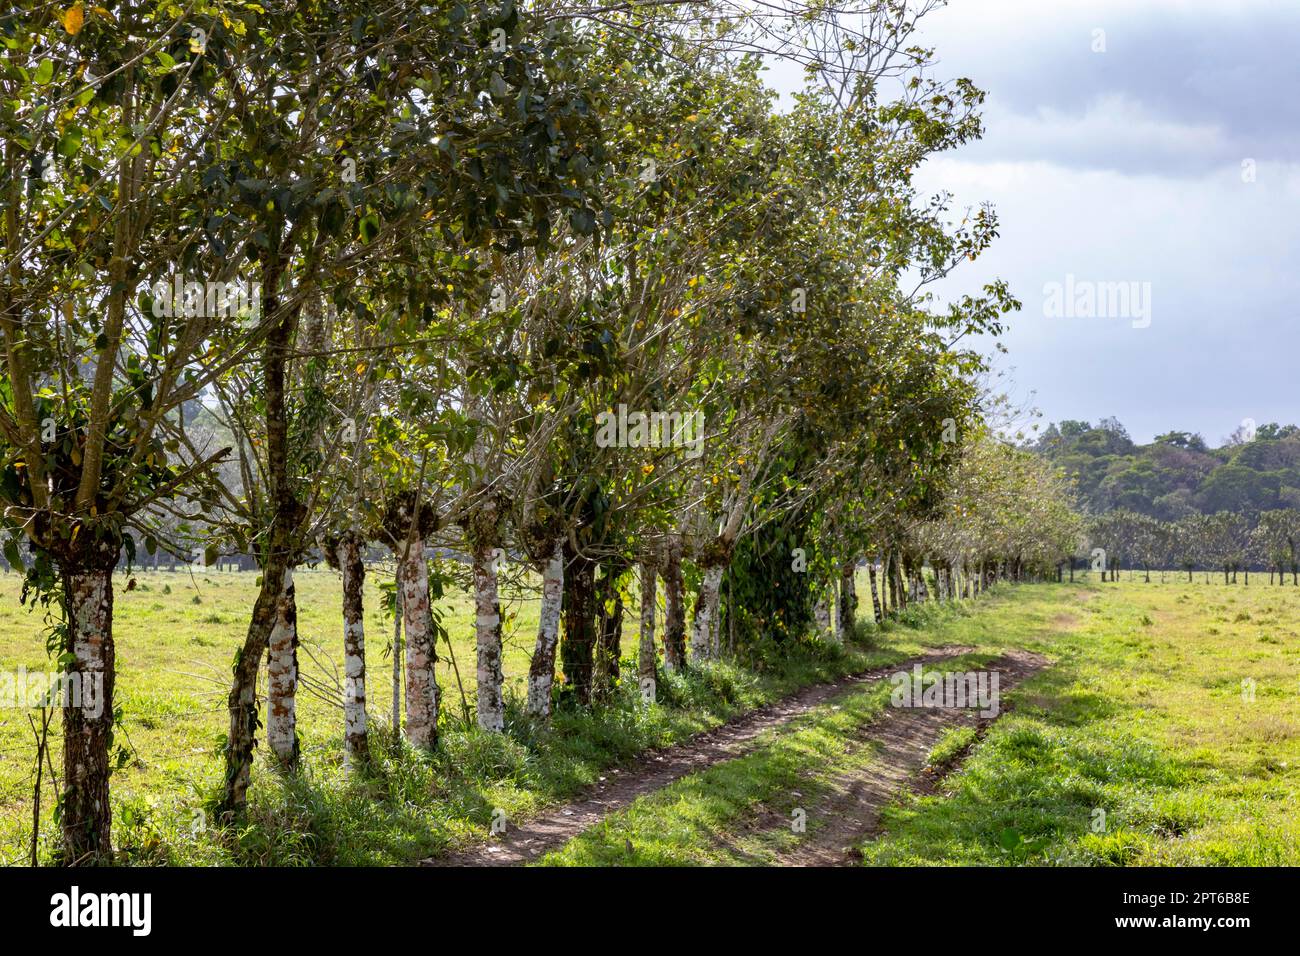 Muelle San Carlos, Costa Rica, Barbed wire strung along a line of trees serves as a fence between cattle pastures Stock Photo